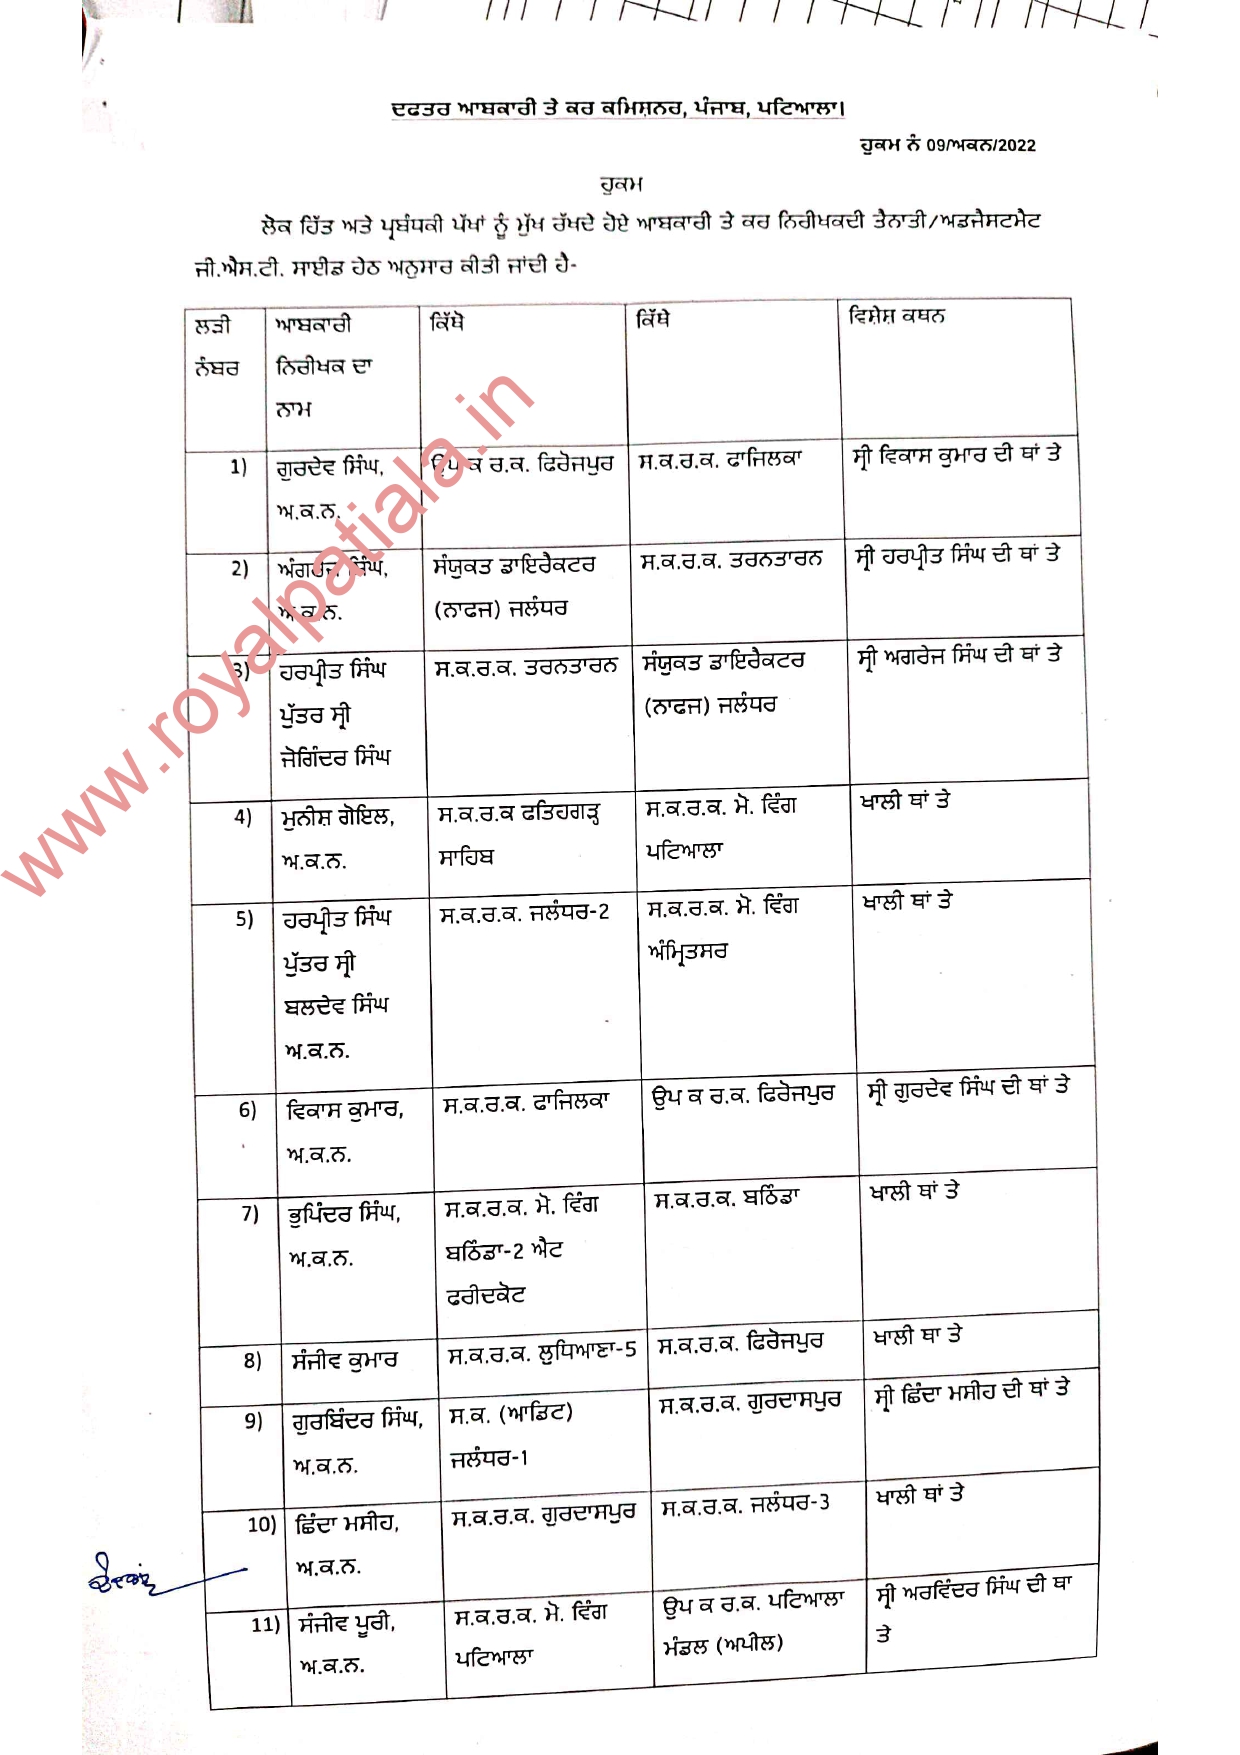 Punjab transfers-73 Excise and Taxation Inspector transferred to GST wing 